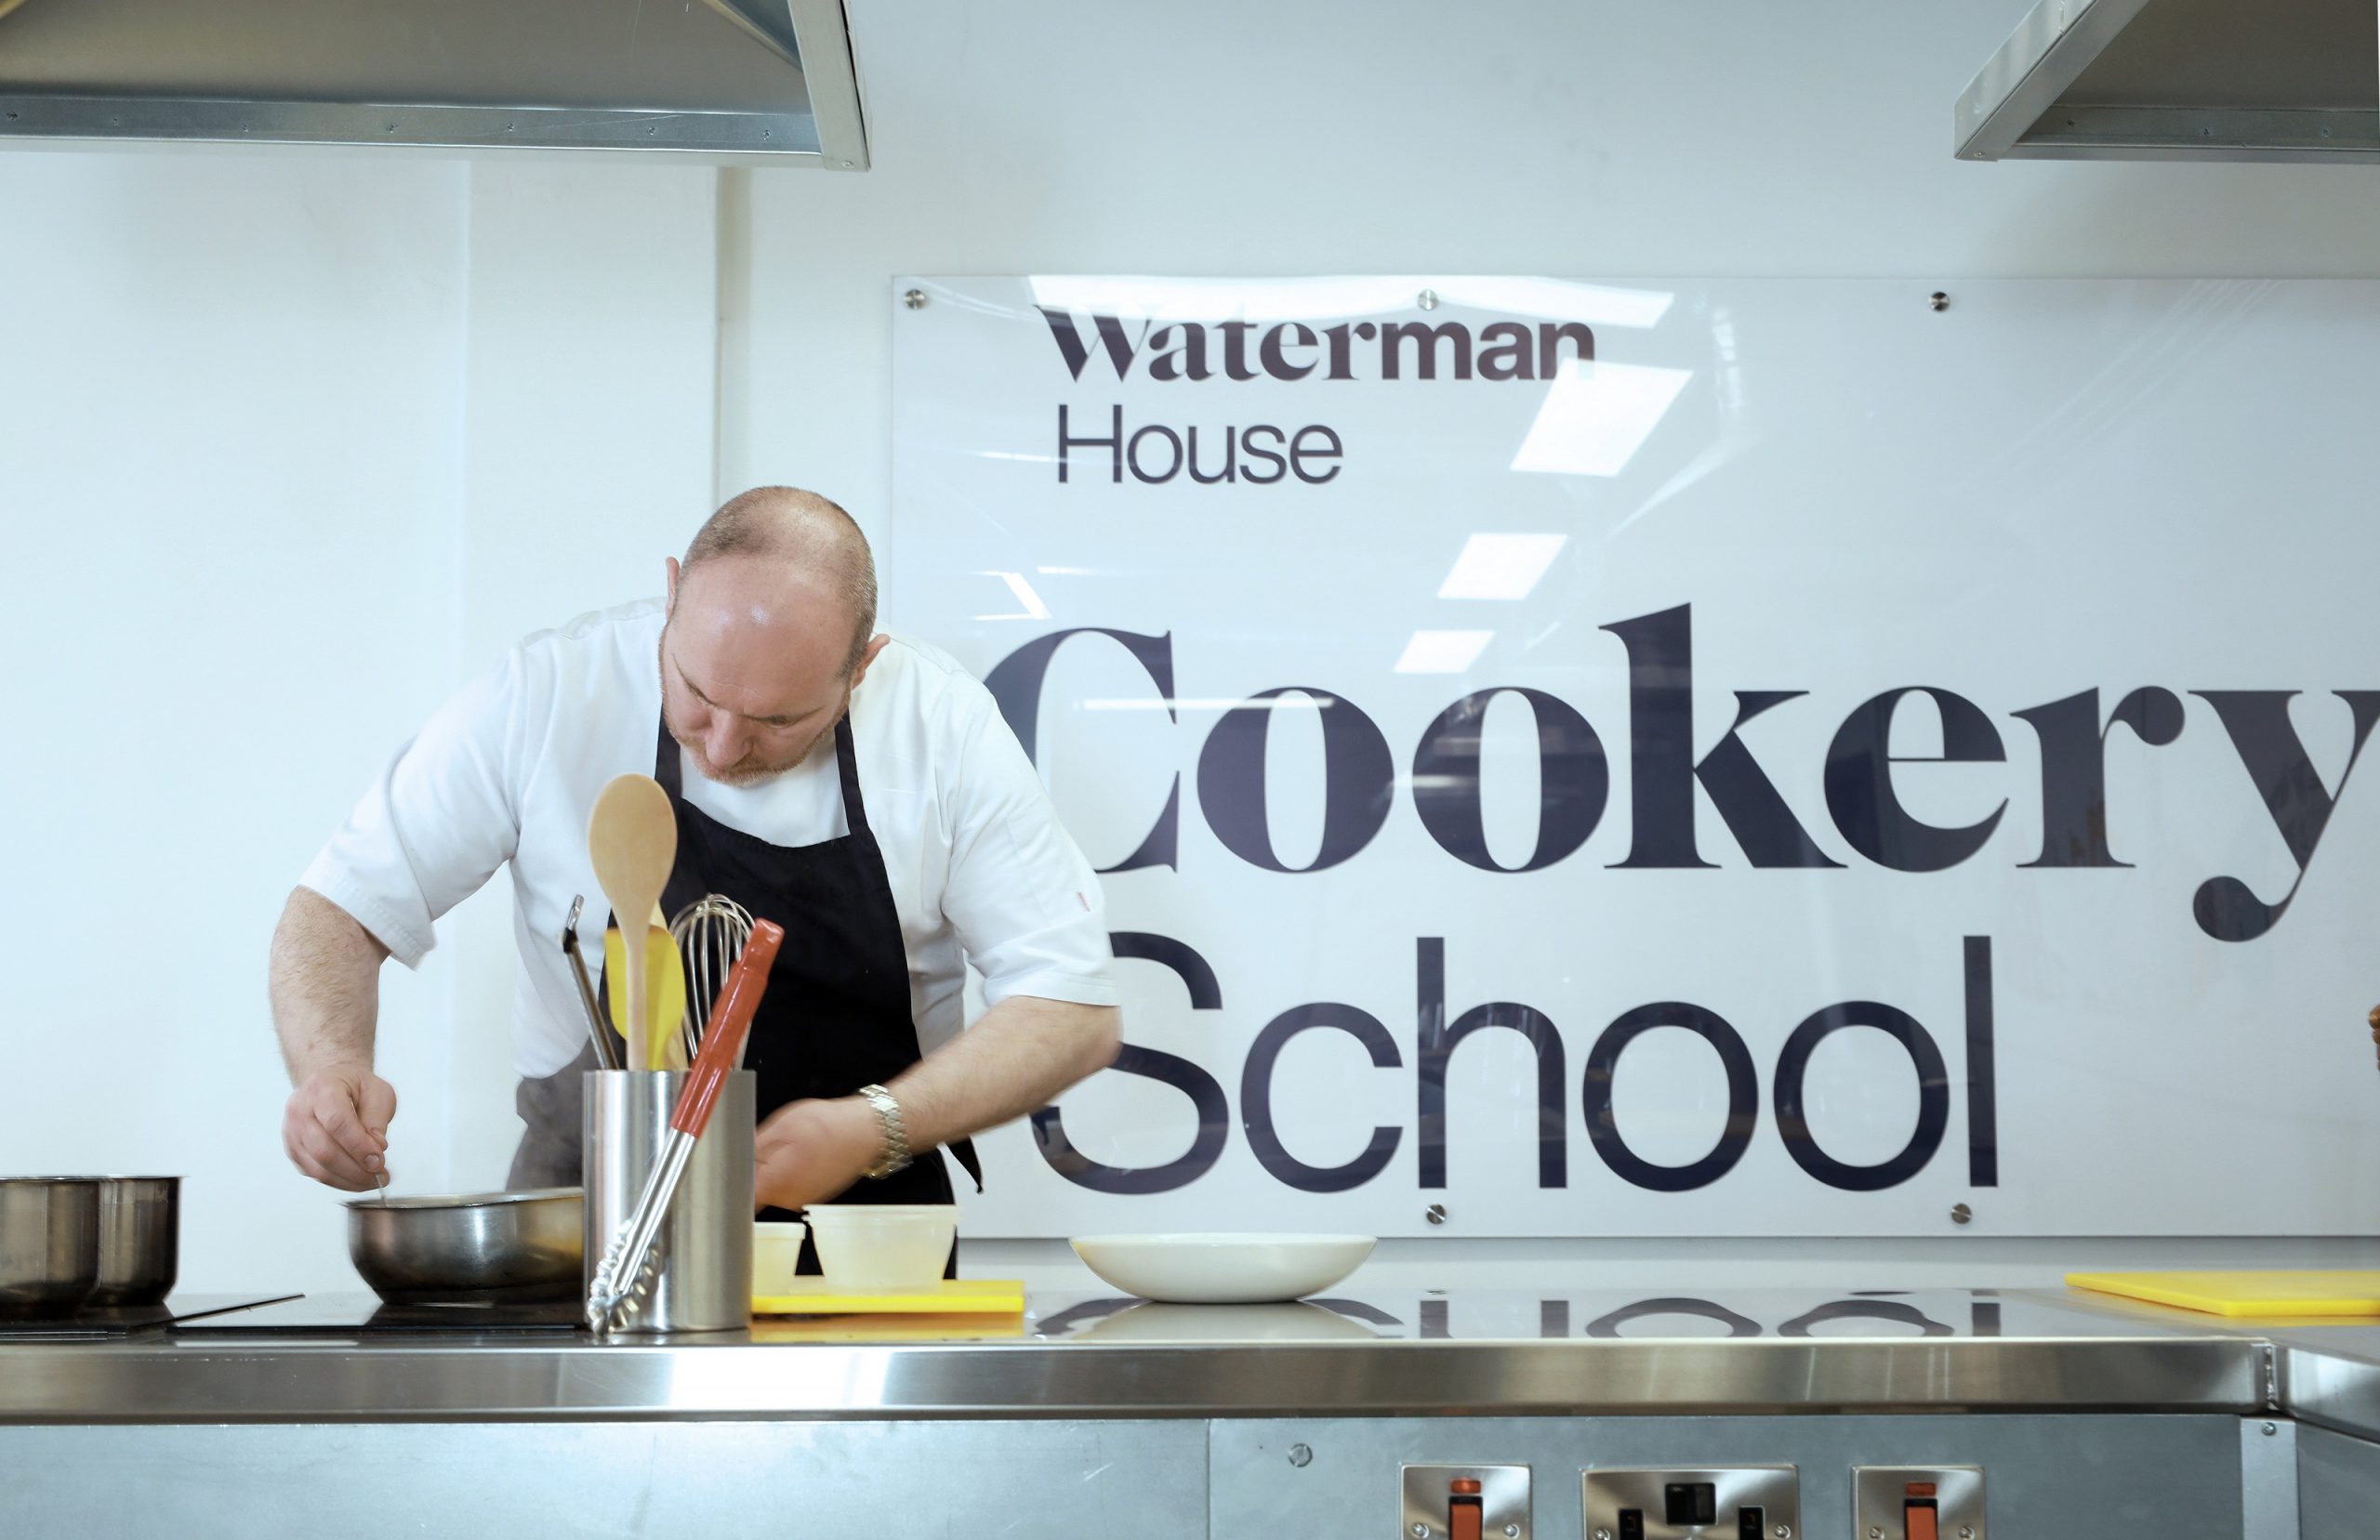 James St chef to share his passion at new cookery school